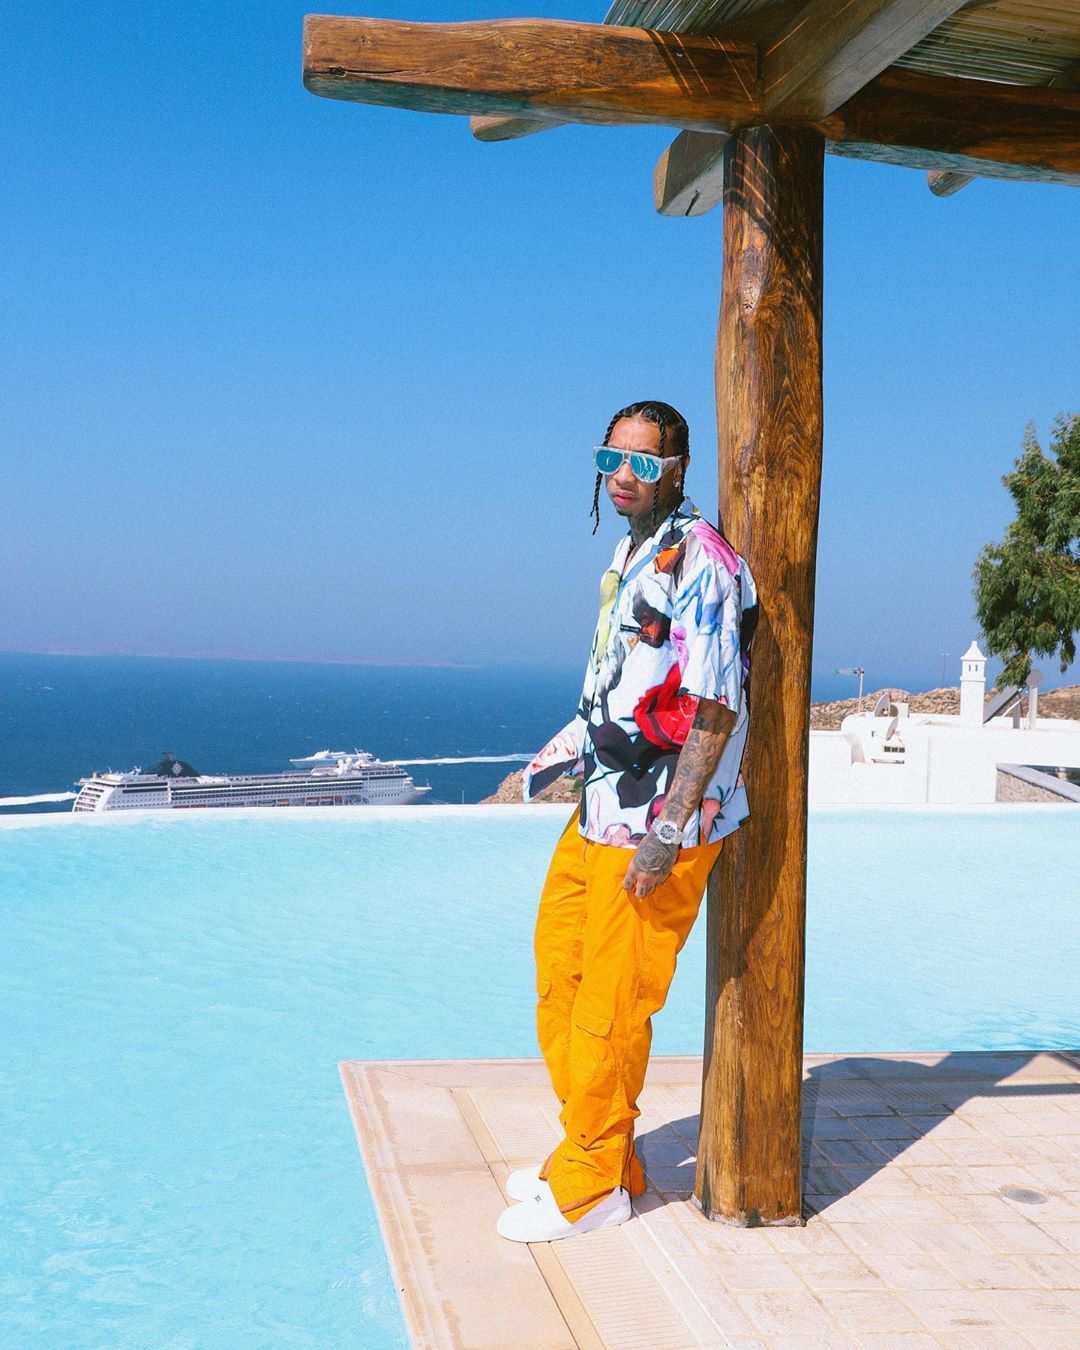 SPOTTED: Tyga Dons Louis Vuitton Sunglasses Poolside in Mykonos